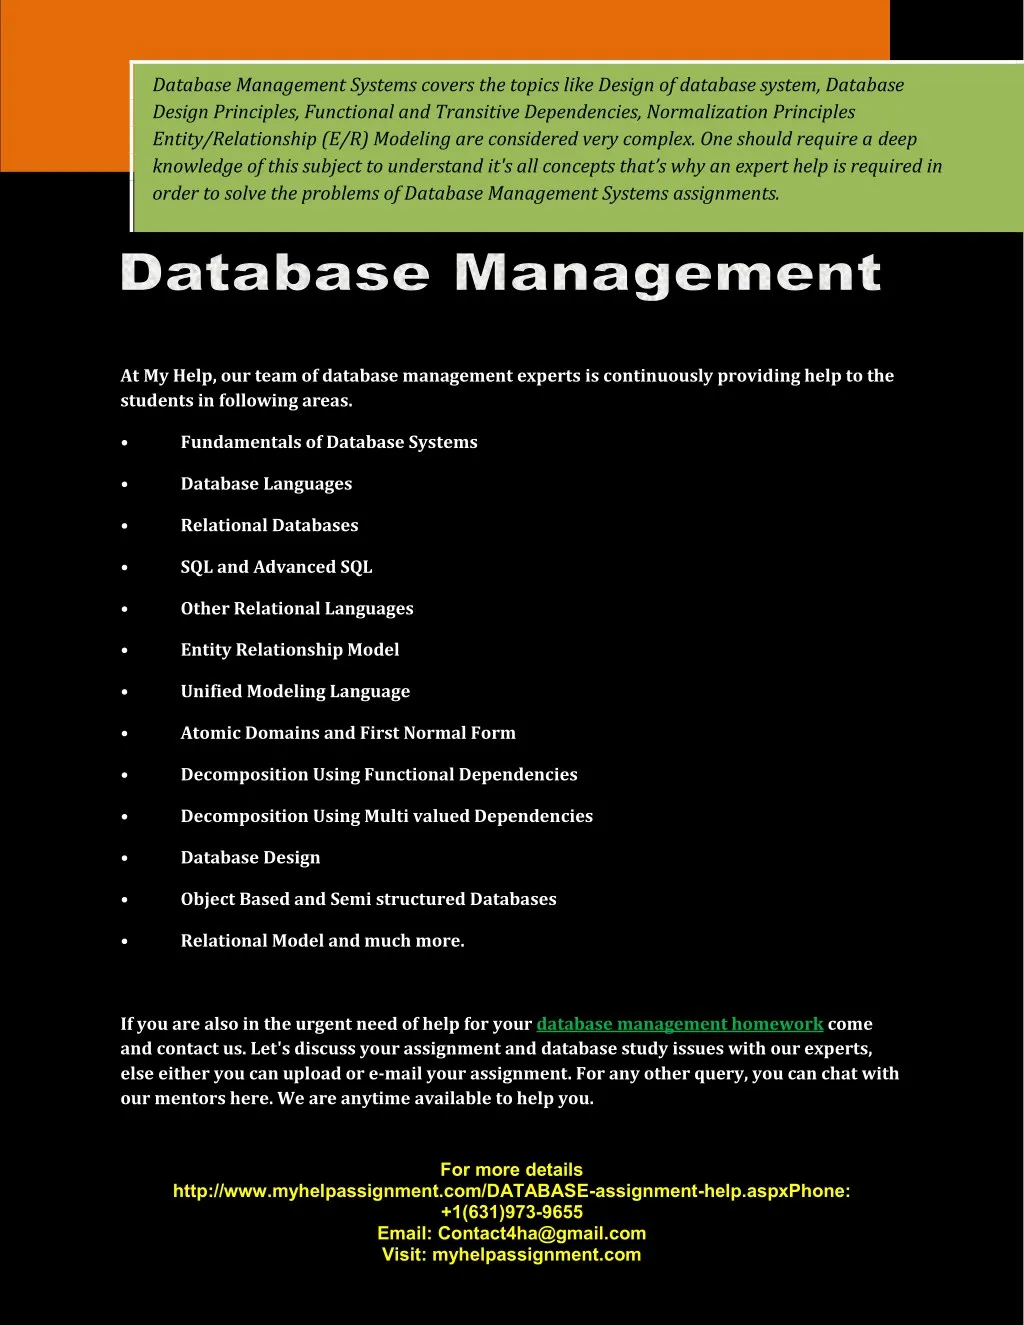 research paper topics for database management systems